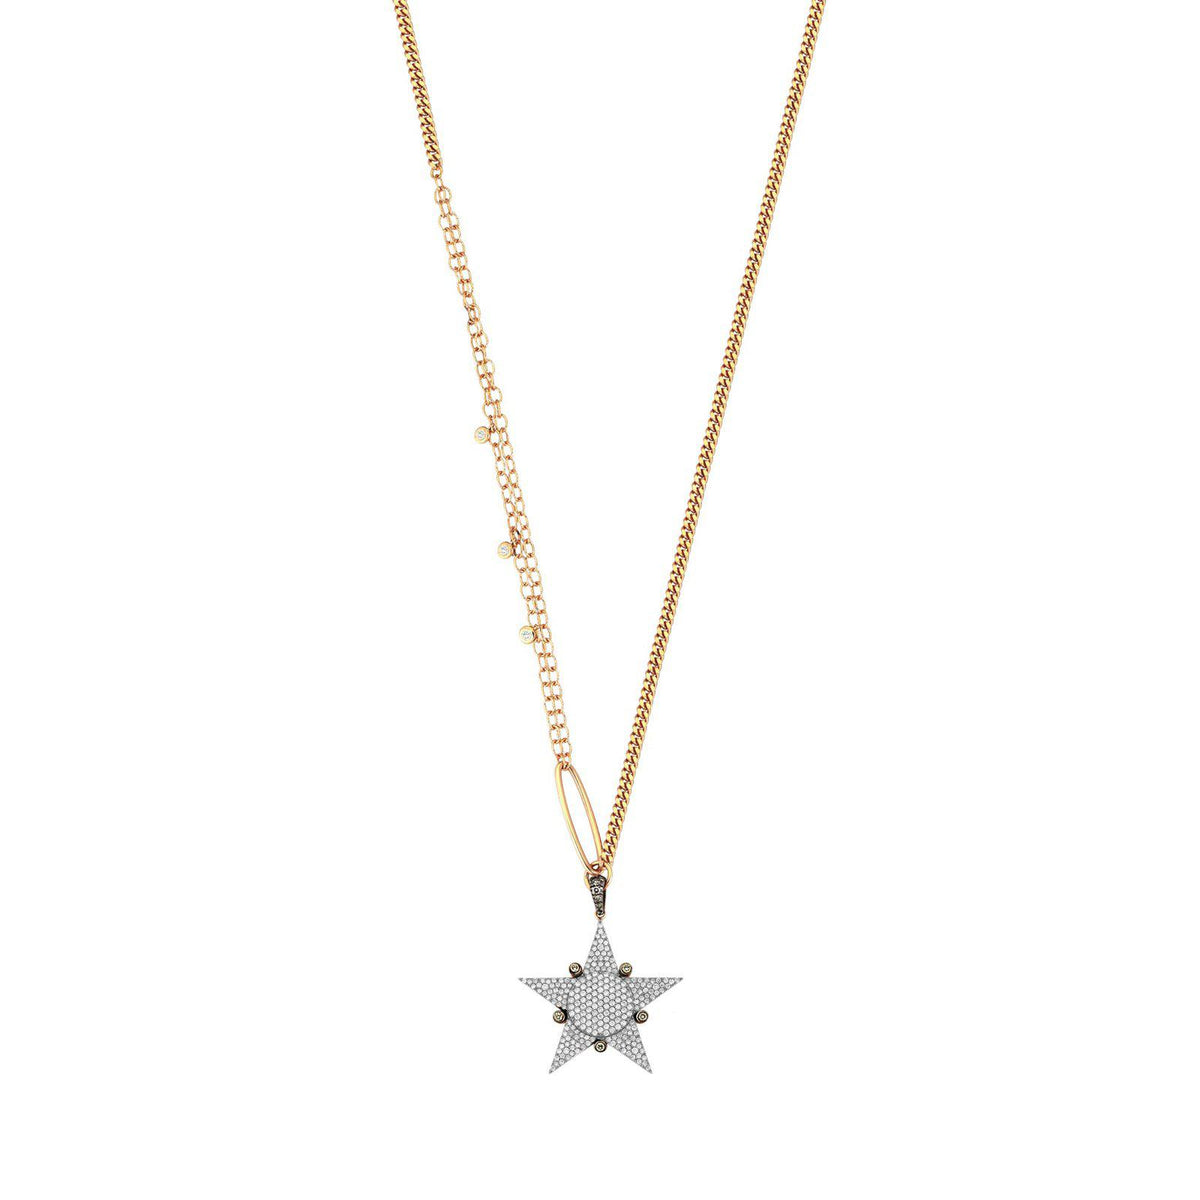 Midi Eclectic Star Necklace